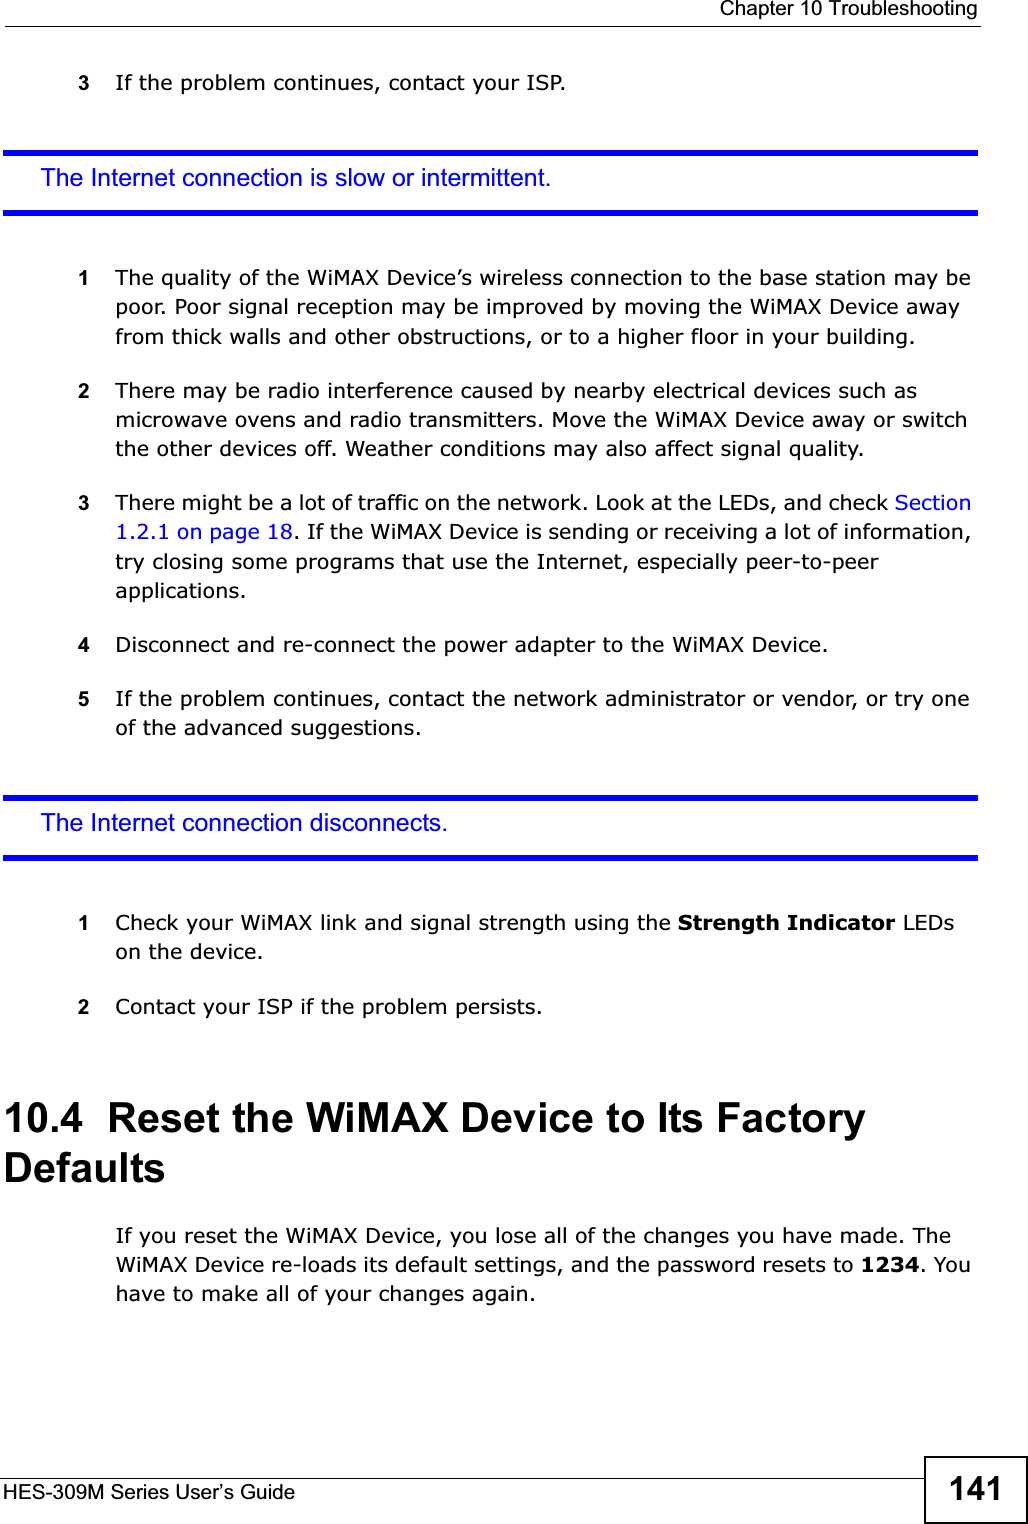  Chapter 10 TroubleshootingHES-309M Series User’s Guide 1413If the problem continues, contact your ISP.The Internet connection is slow or intermittent.1The quality of the WiMAX Device’s wireless connection to the base station may be poor. Poor signal reception may be improved by moving the WiMAX Device away from thick walls and other obstructions, or to a higher floor in your building. 2There may be radio interference caused by nearby electrical devices such as microwave ovens and radio transmitters. Move the WiMAX Device away or switch the other devices off. Weather conditions may also affect signal quality.3There might be a lot of traffic on the network. Look at the LEDs, and check Section 1.2.1 on page 18. If the WiMAX Device is sending or receiving a lot of information, try closing some programs that use the Internet, especially peer-to-peer applications.4Disconnect and re-connect the power adapter to the WiMAX Device.5If the problem continues, contact the network administrator or vendor, or try one of the advanced suggestions.The Internet connection disconnects.1Check your WiMAX link and signal strength using the Strength Indicator LEDs on the device.2Contact your ISP if the problem persists. 10.4  Reset the WiMAX Device to Its Factory DefaultsIf you reset the WiMAX Device, you lose all of the changes you have made. The WiMAX Device re-loads its default settings, and the password resets to 1234. You have to make all of your changes again.